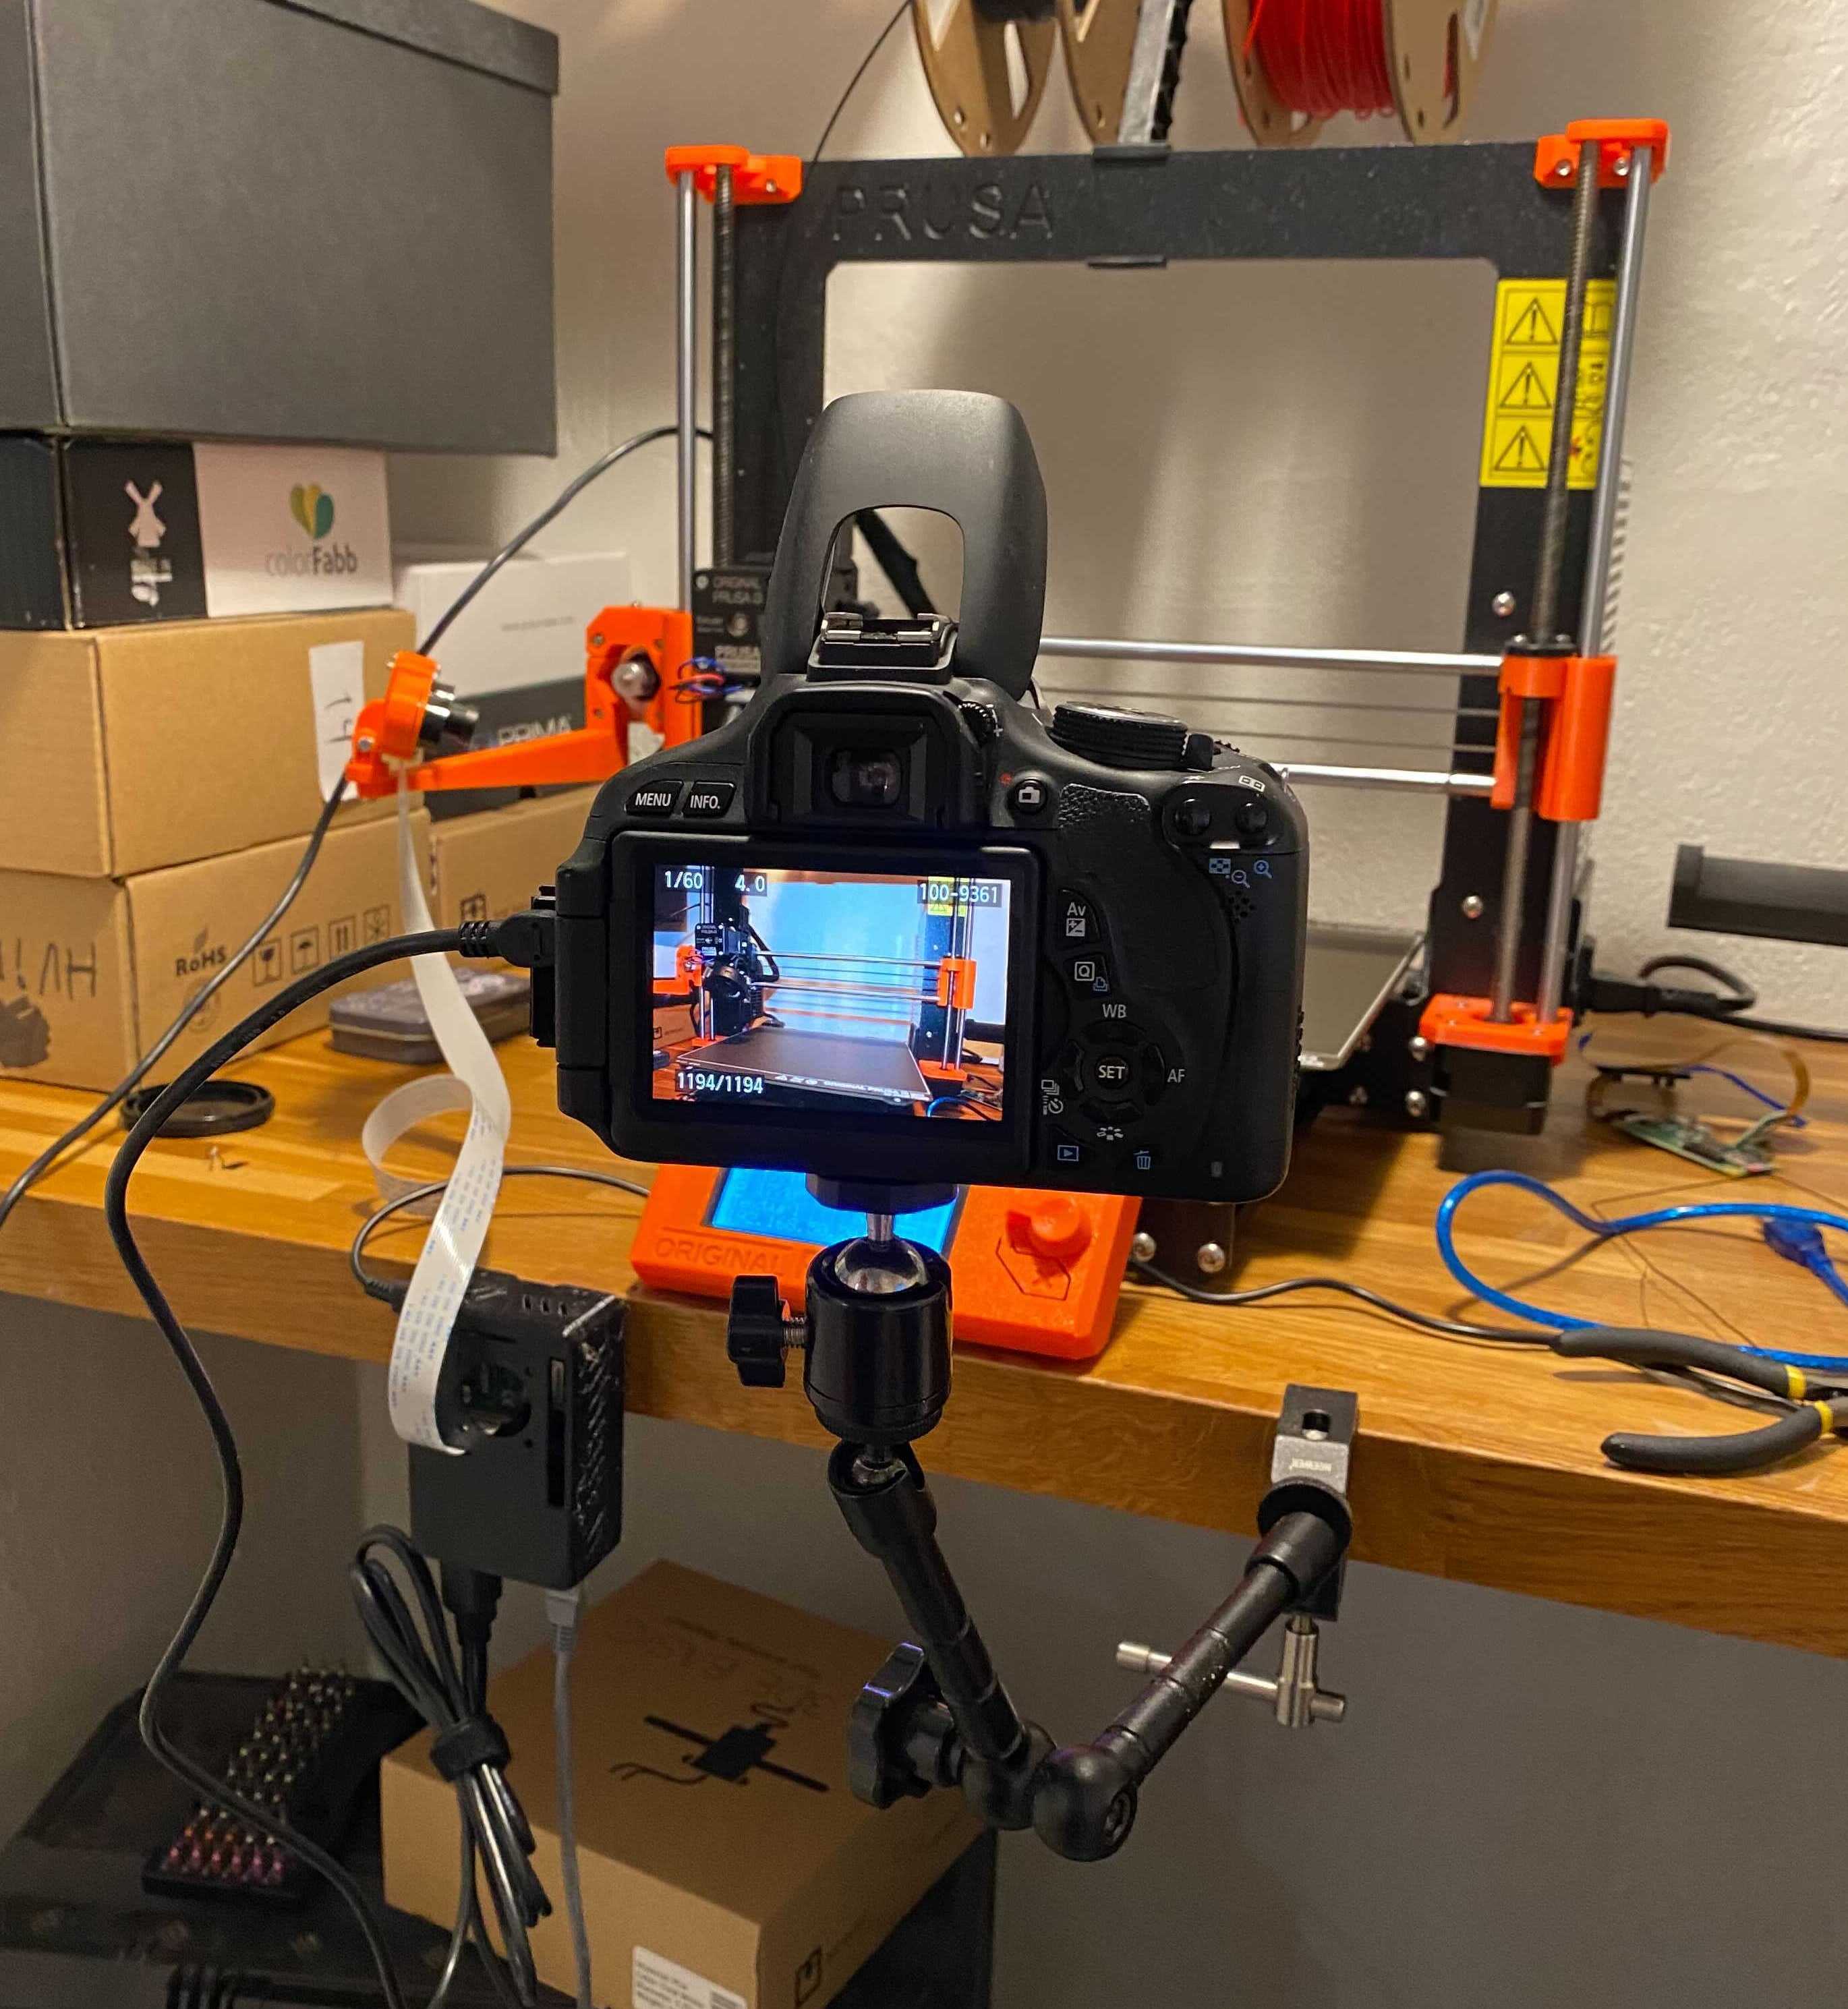 Setting up octoprint on a Raspberry pi to use an external DSLR for making timelapses